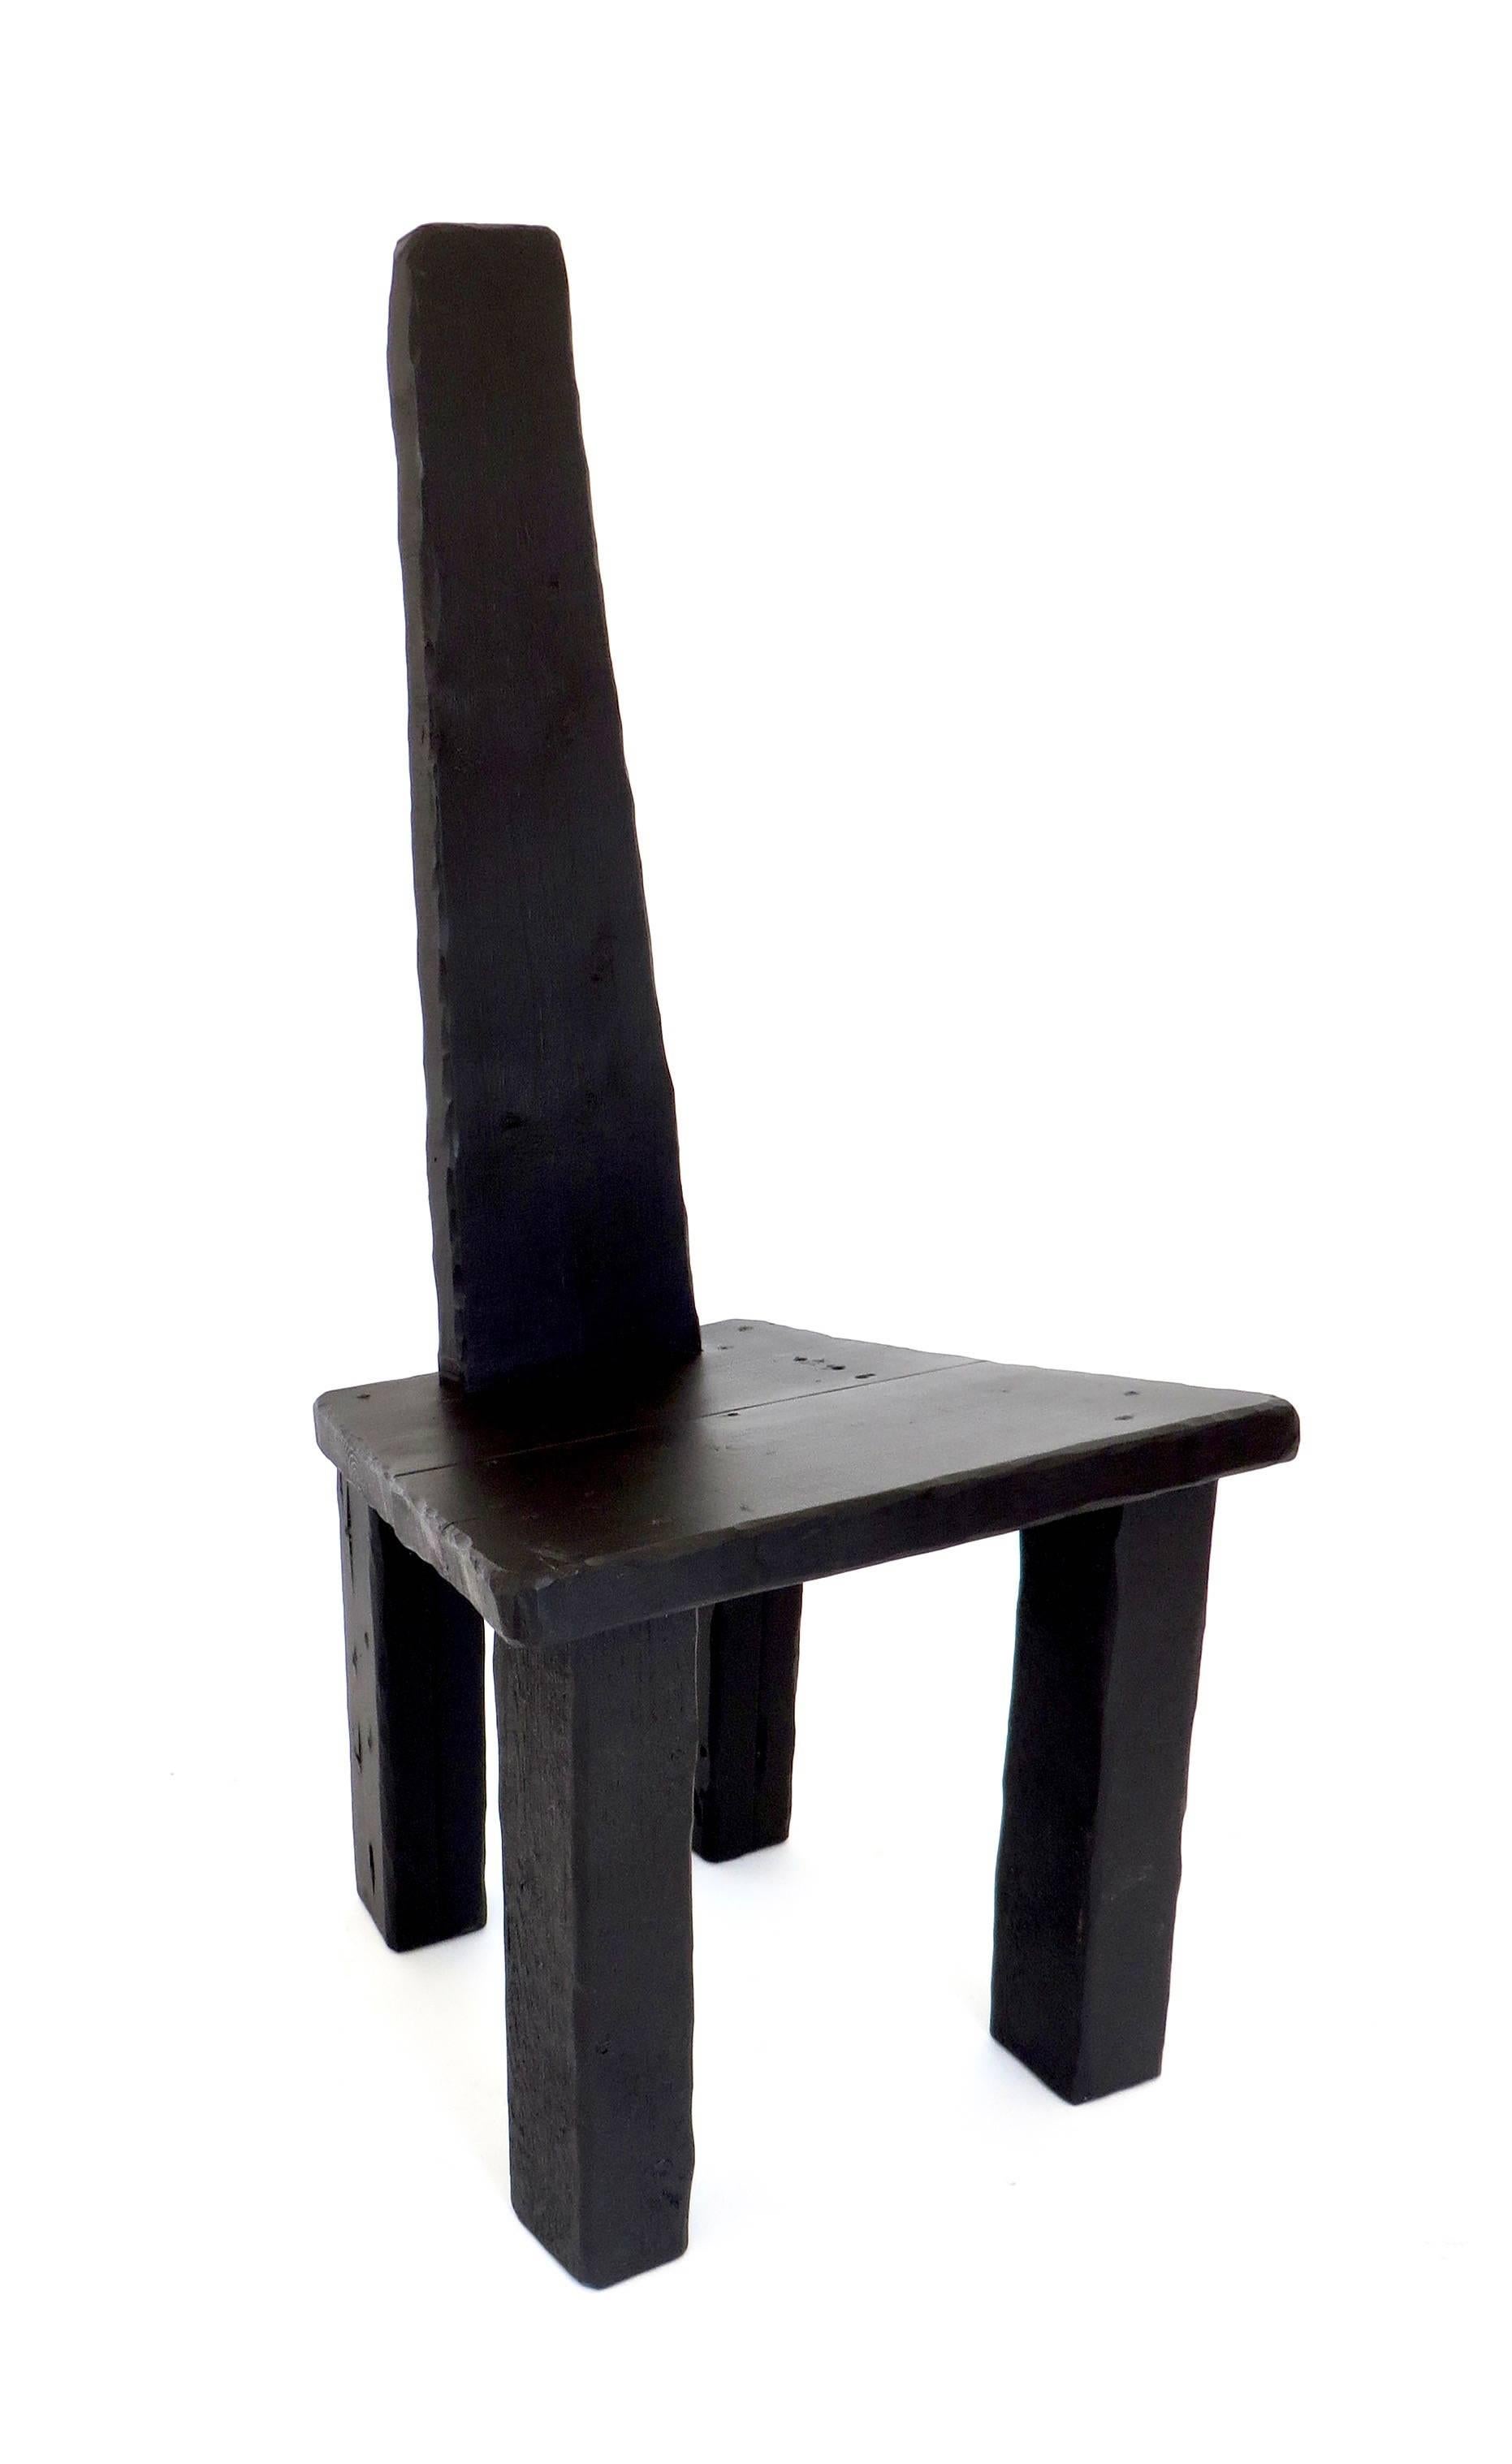 A hand-carved salvaged recovered contemporary wood chair made by artist designer Hannah Vaughan.
This chair is part of the 2017 anthropological collection limited edition series.
#1 of 10.
Black artists acrylic paint sealed with beeswax. All